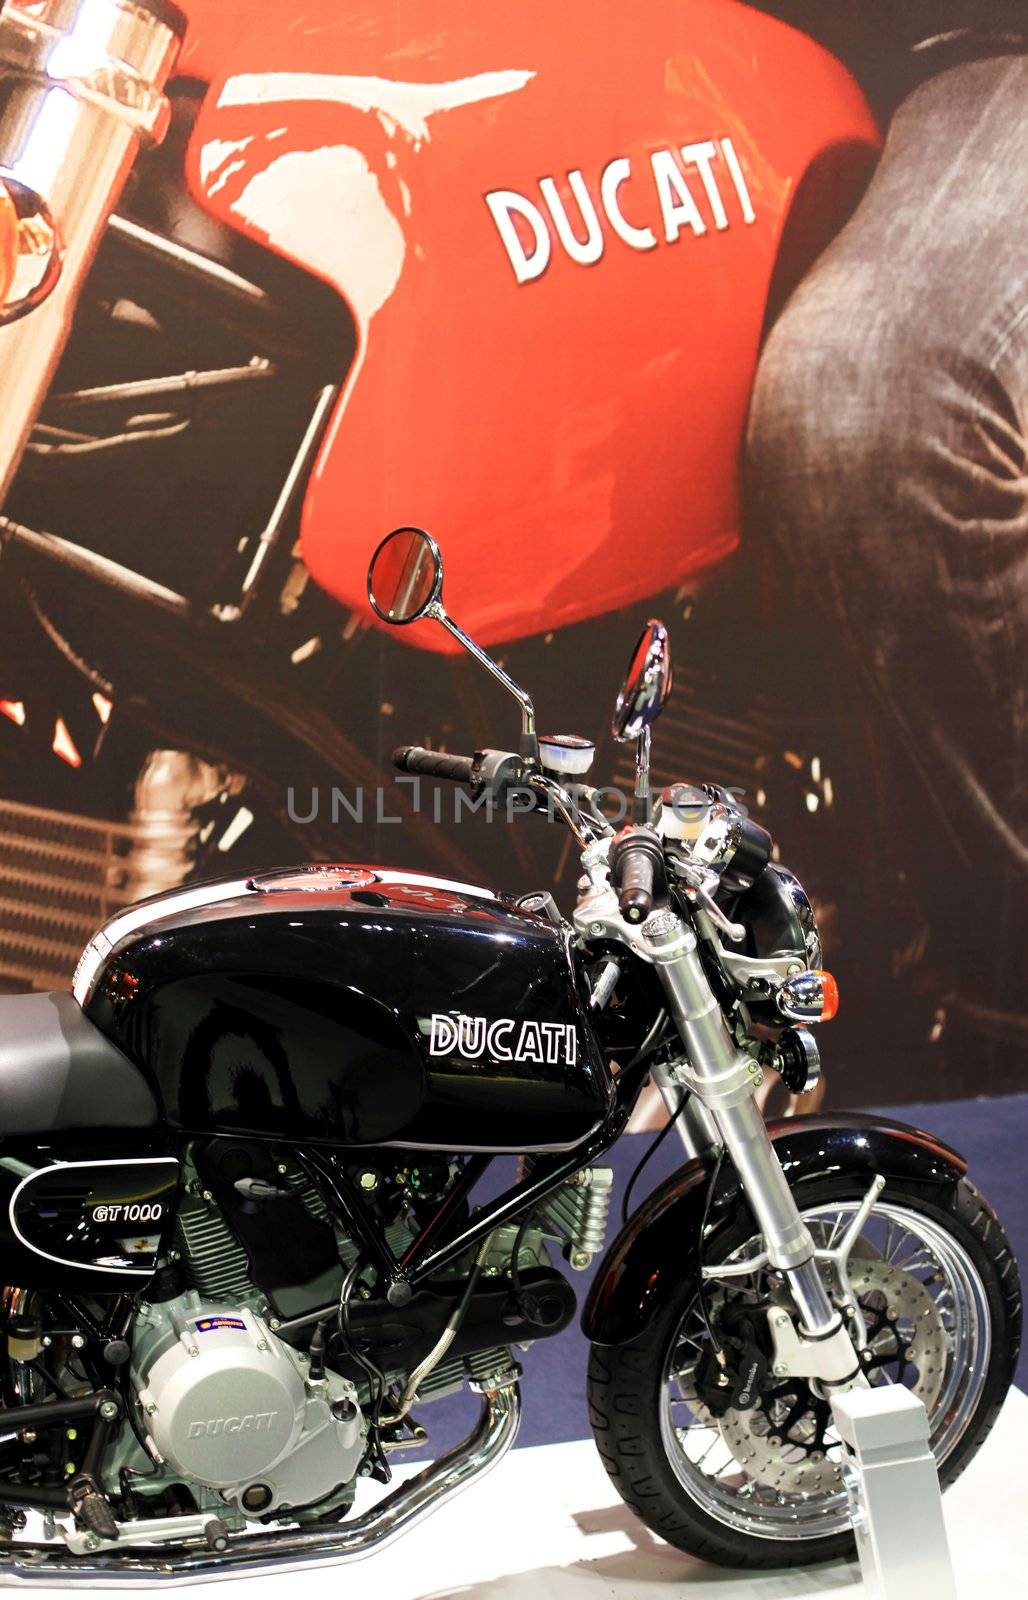 Ducati motorcycles in exhibition at EICMA, International Motorcycle Exhibition in Milan, Italy.